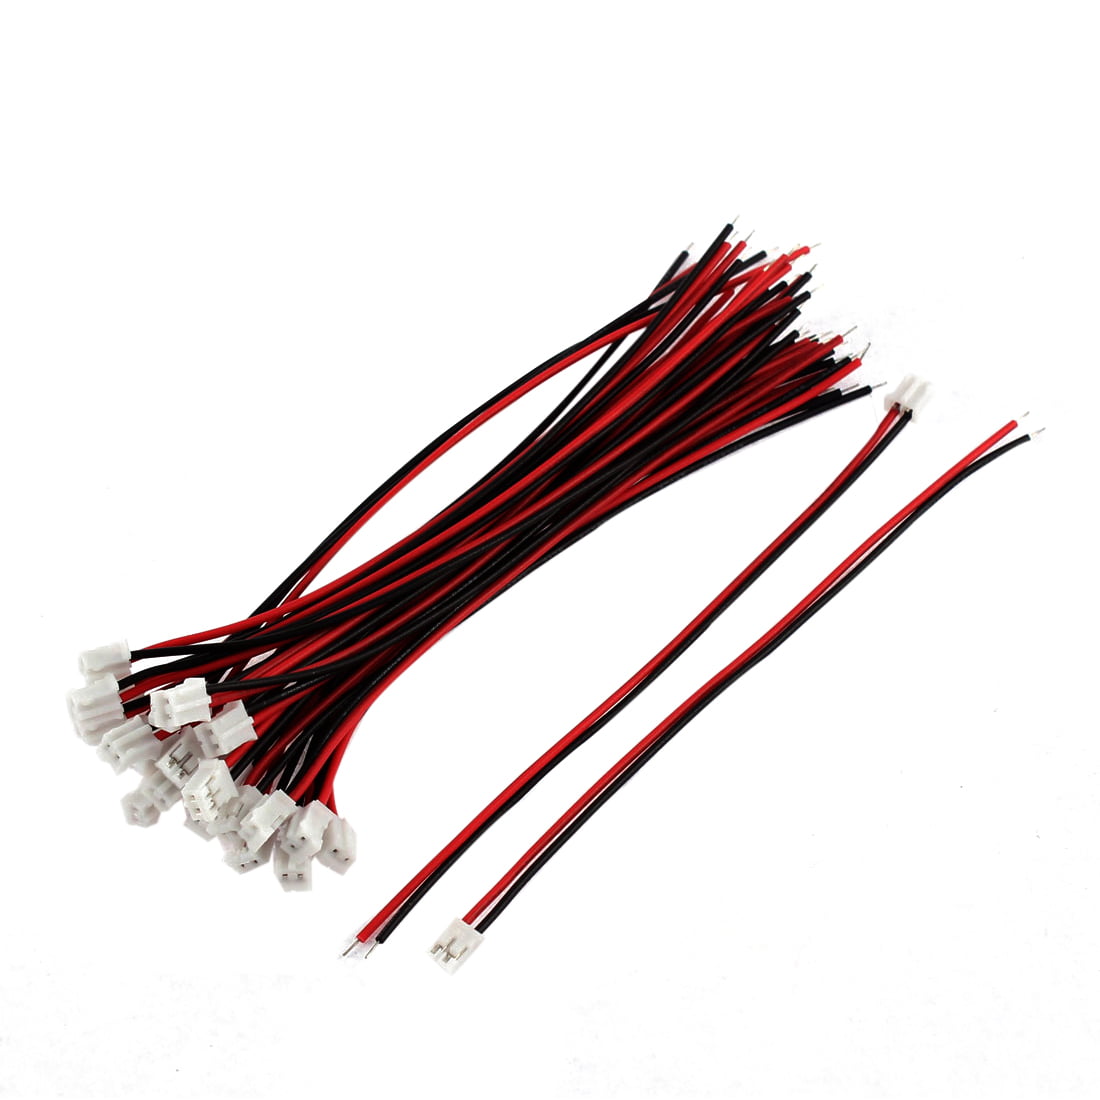 20PCS JST 2.5 SM-3 Pin Female to ZH 1.5 3-Pin JST Male Cable Lead Cord 150MM 